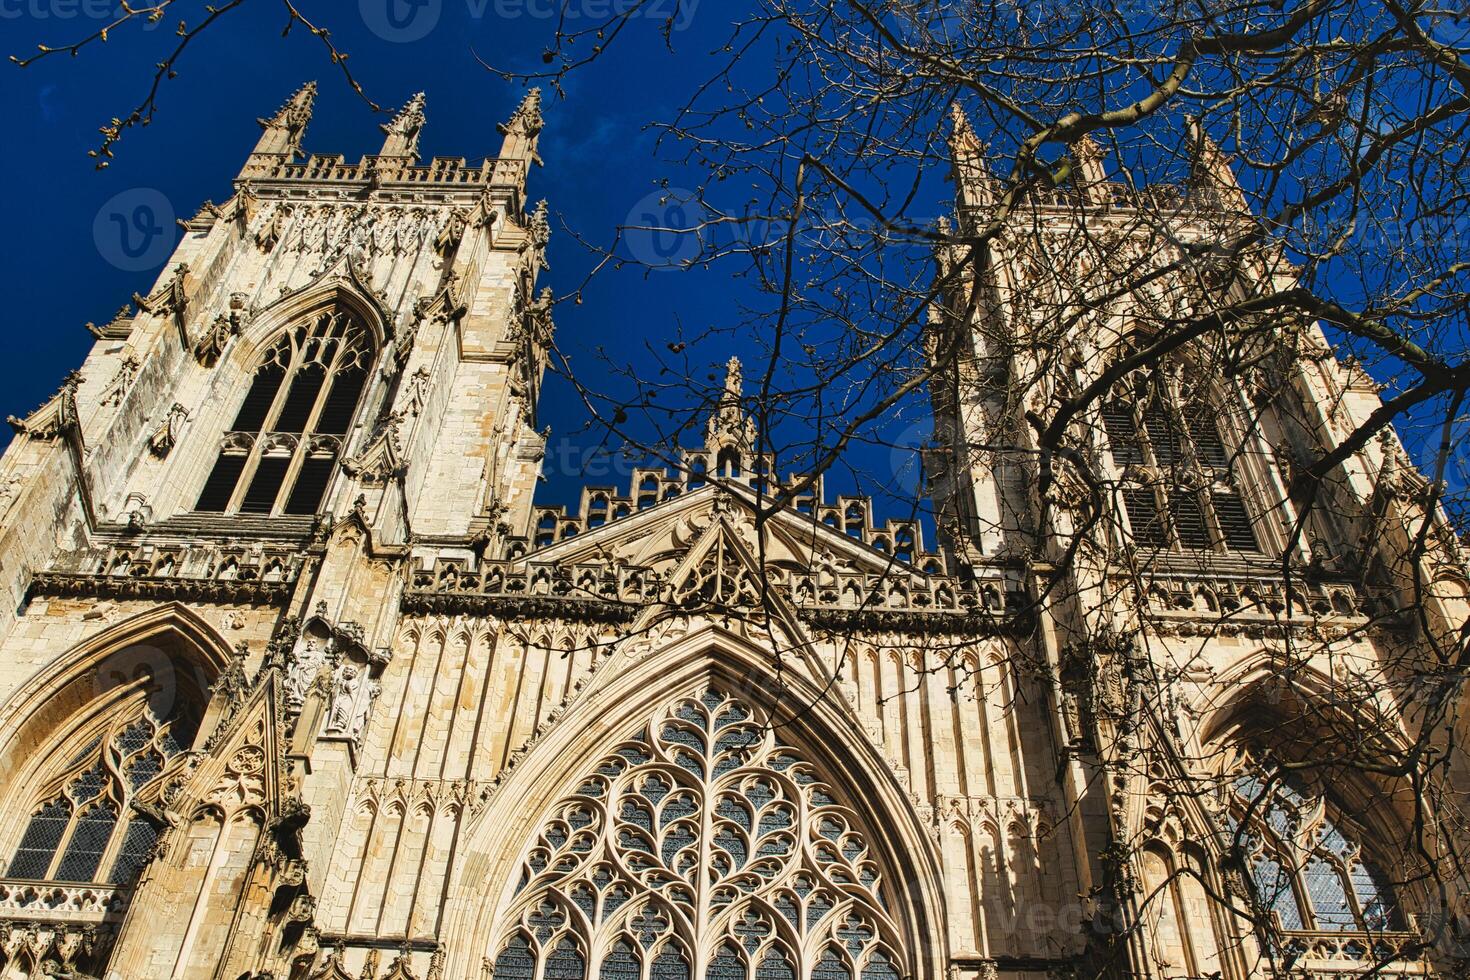 Gothic cathedral facade with intricate architecture and blue sky background, framed by bare tree branches in York, North Yorkshire, England. photo